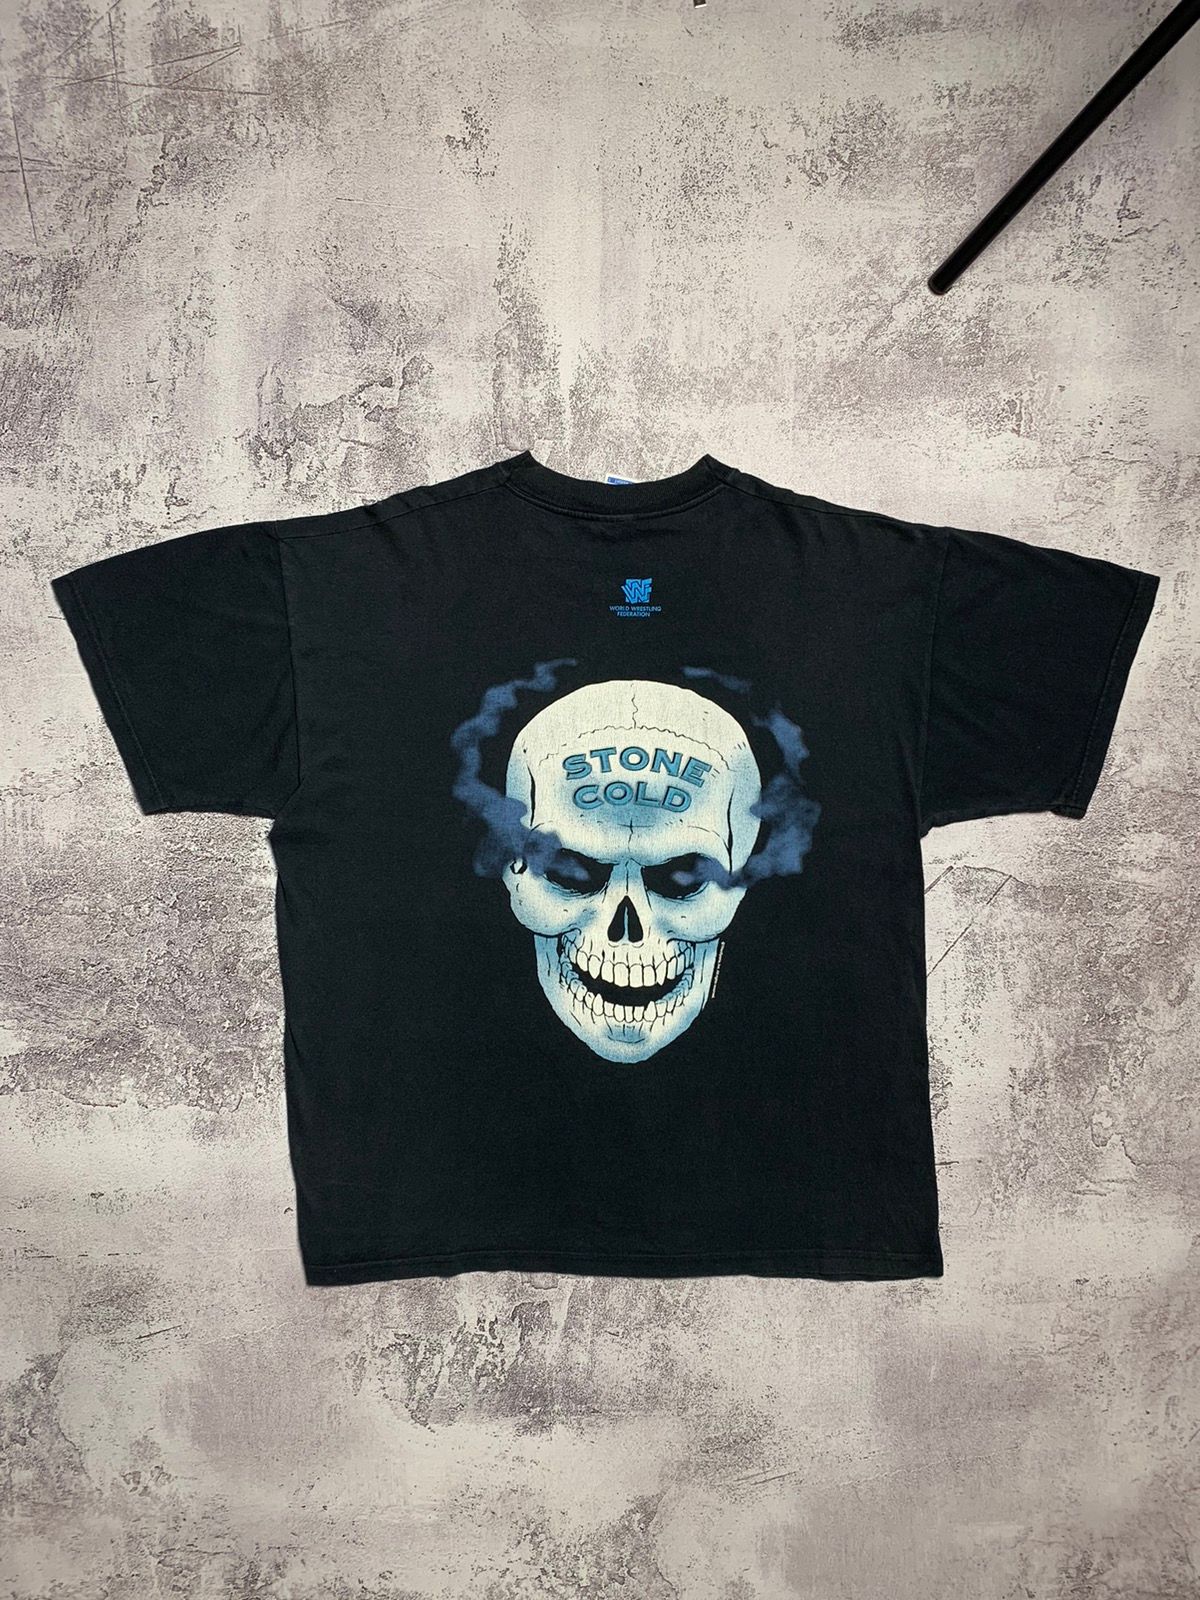 Pre-owned Vintage X Wwe Very Vintage Stone Cold Austin 3:16 90's Skull T-shirt In Black